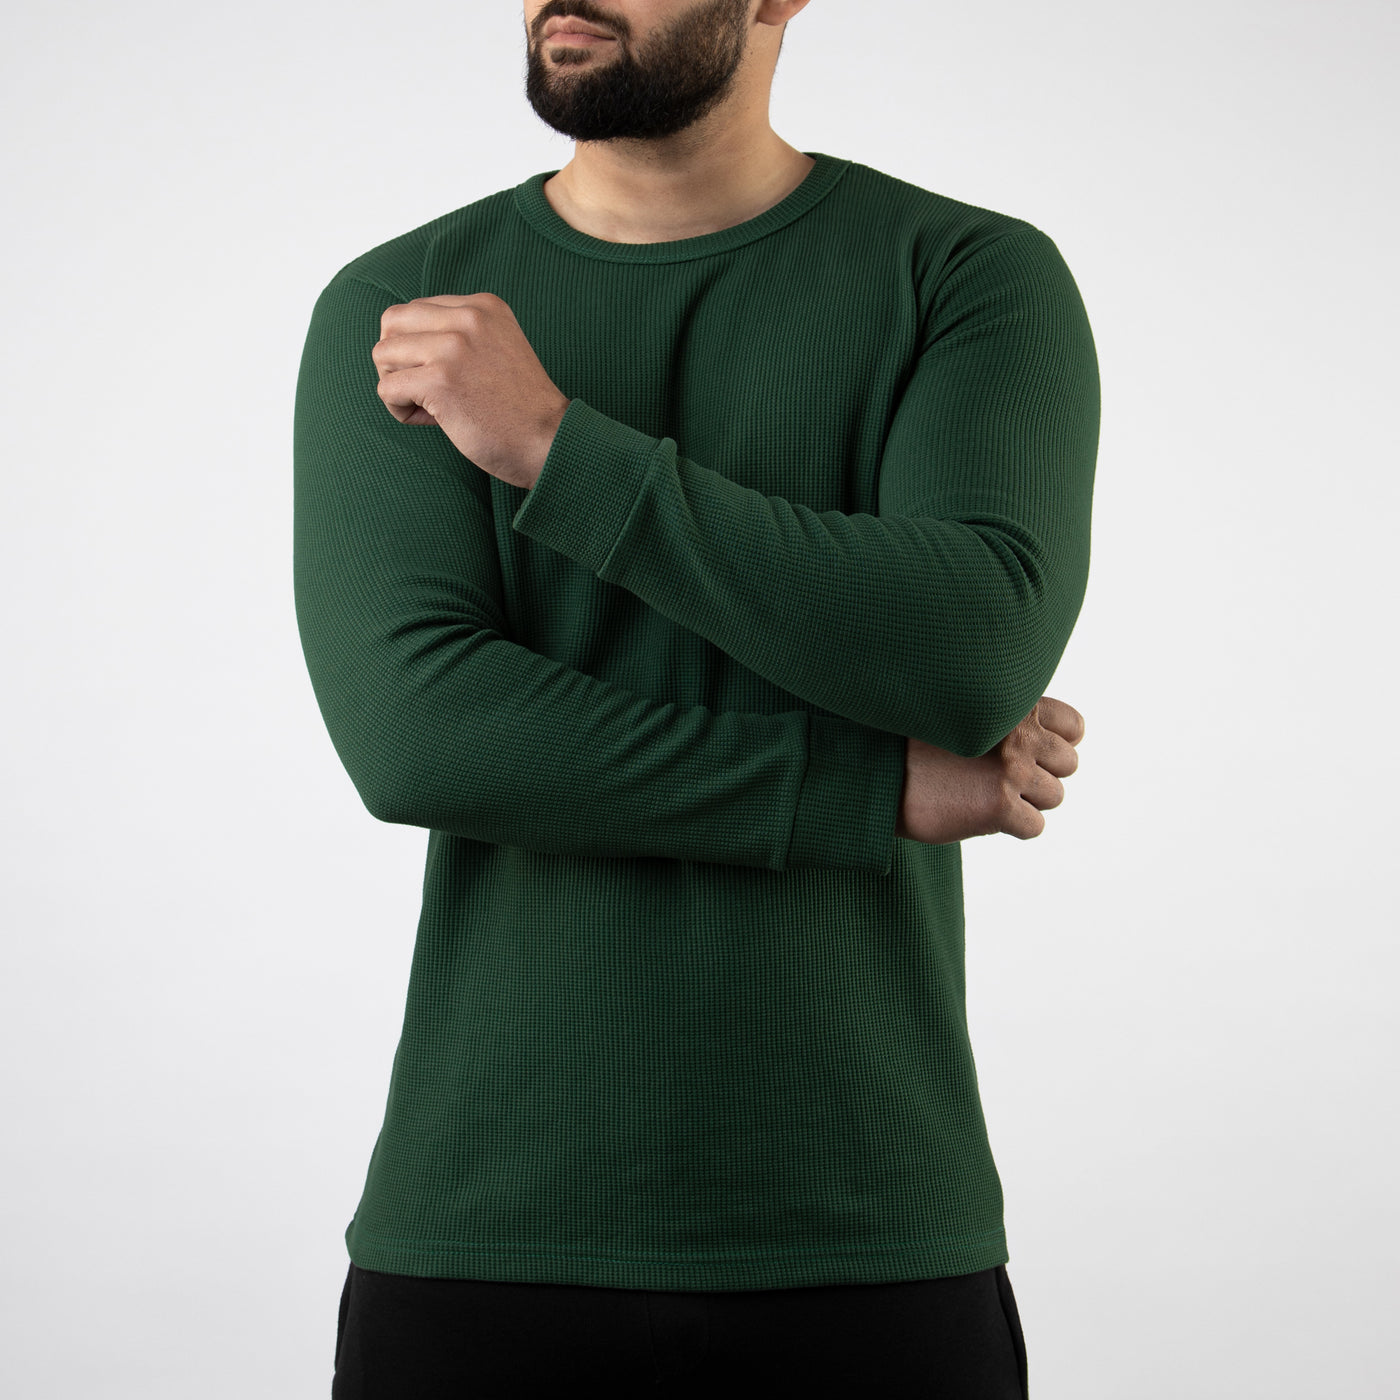 Green Thermal Full Sleeves Waffle-Knit